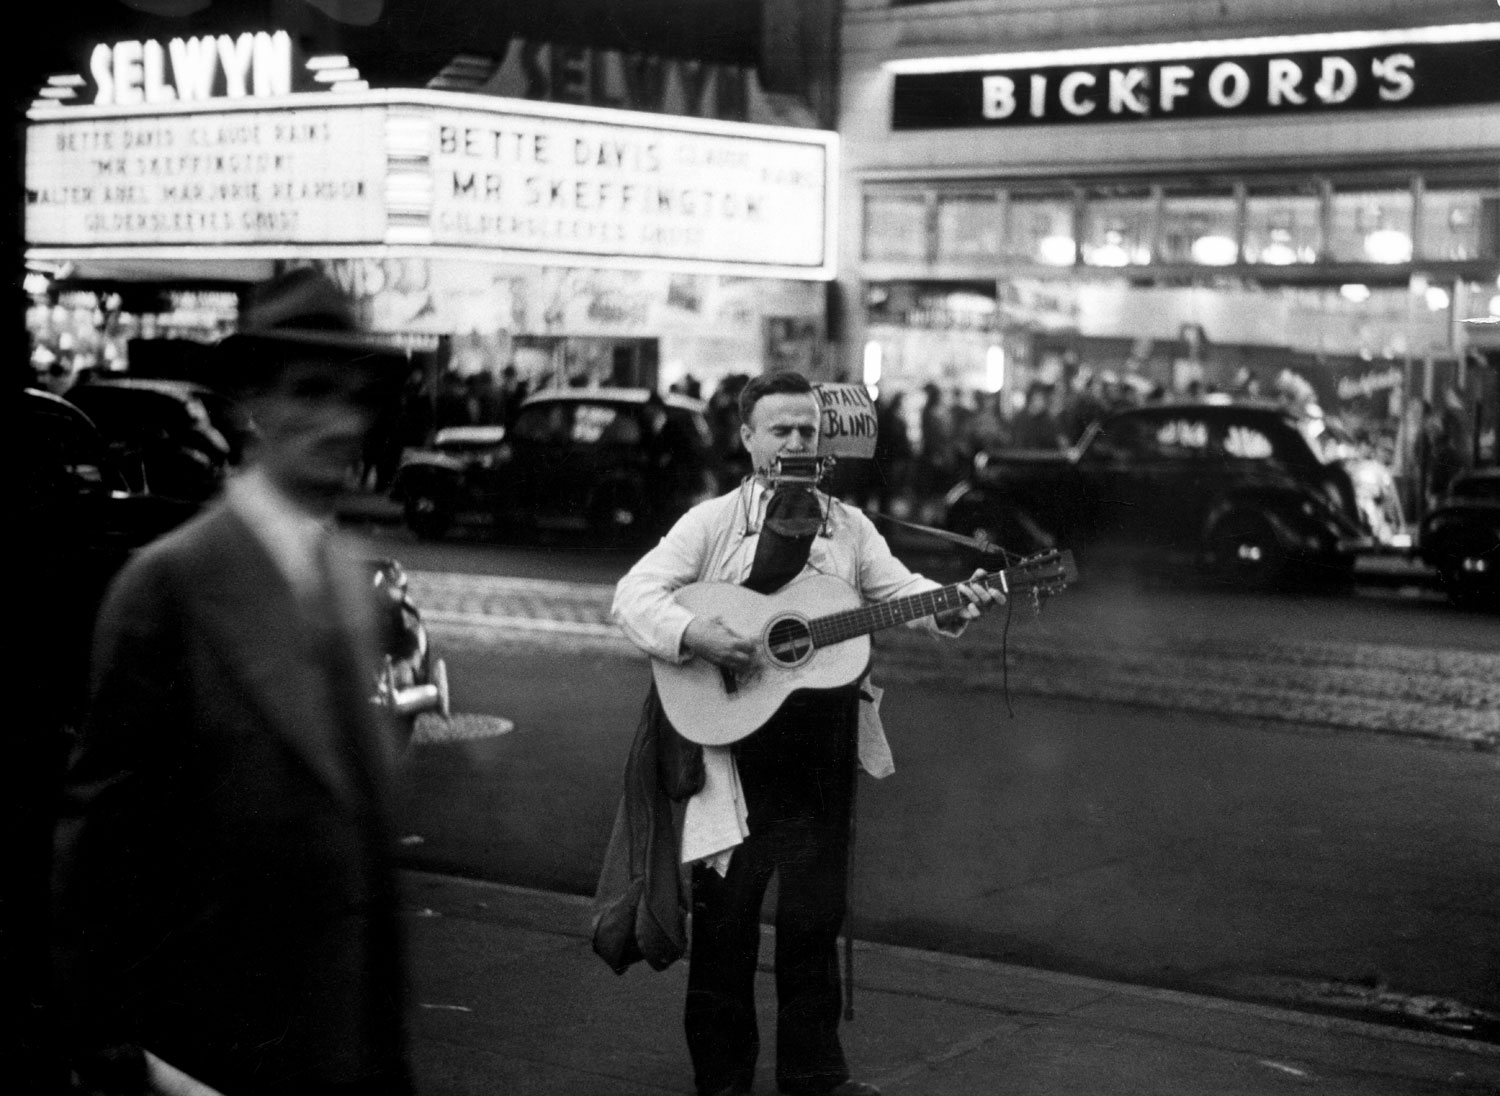 A strolling blind musician plays guitar and harmonica along Broadway at night in the Times Square Area in 1944. "Mr. Skeffington" is playing at the Selwyn Theater across the street.